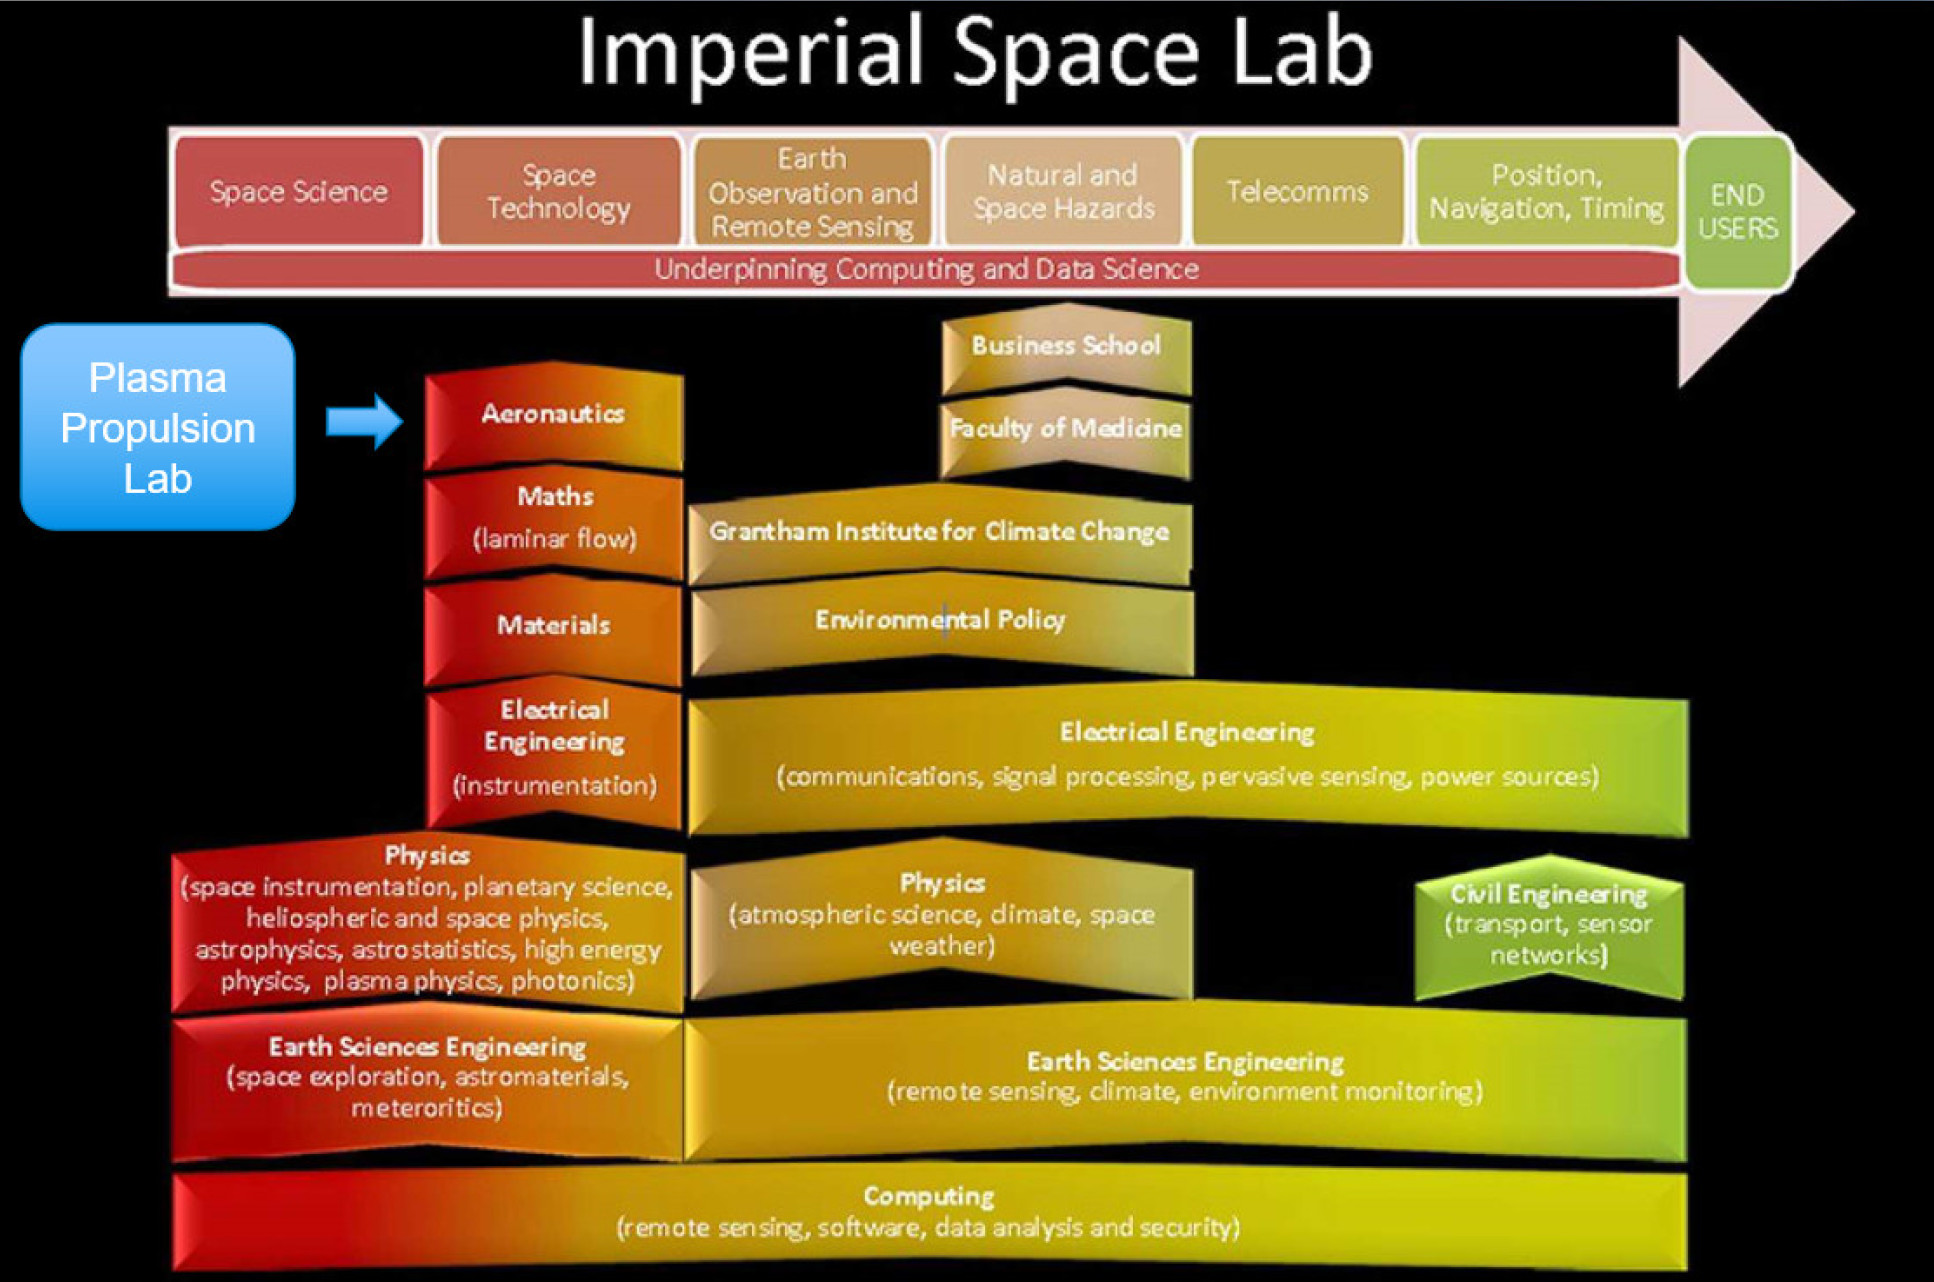 Structure of the Imperial Space lab and the positioning of IPPL